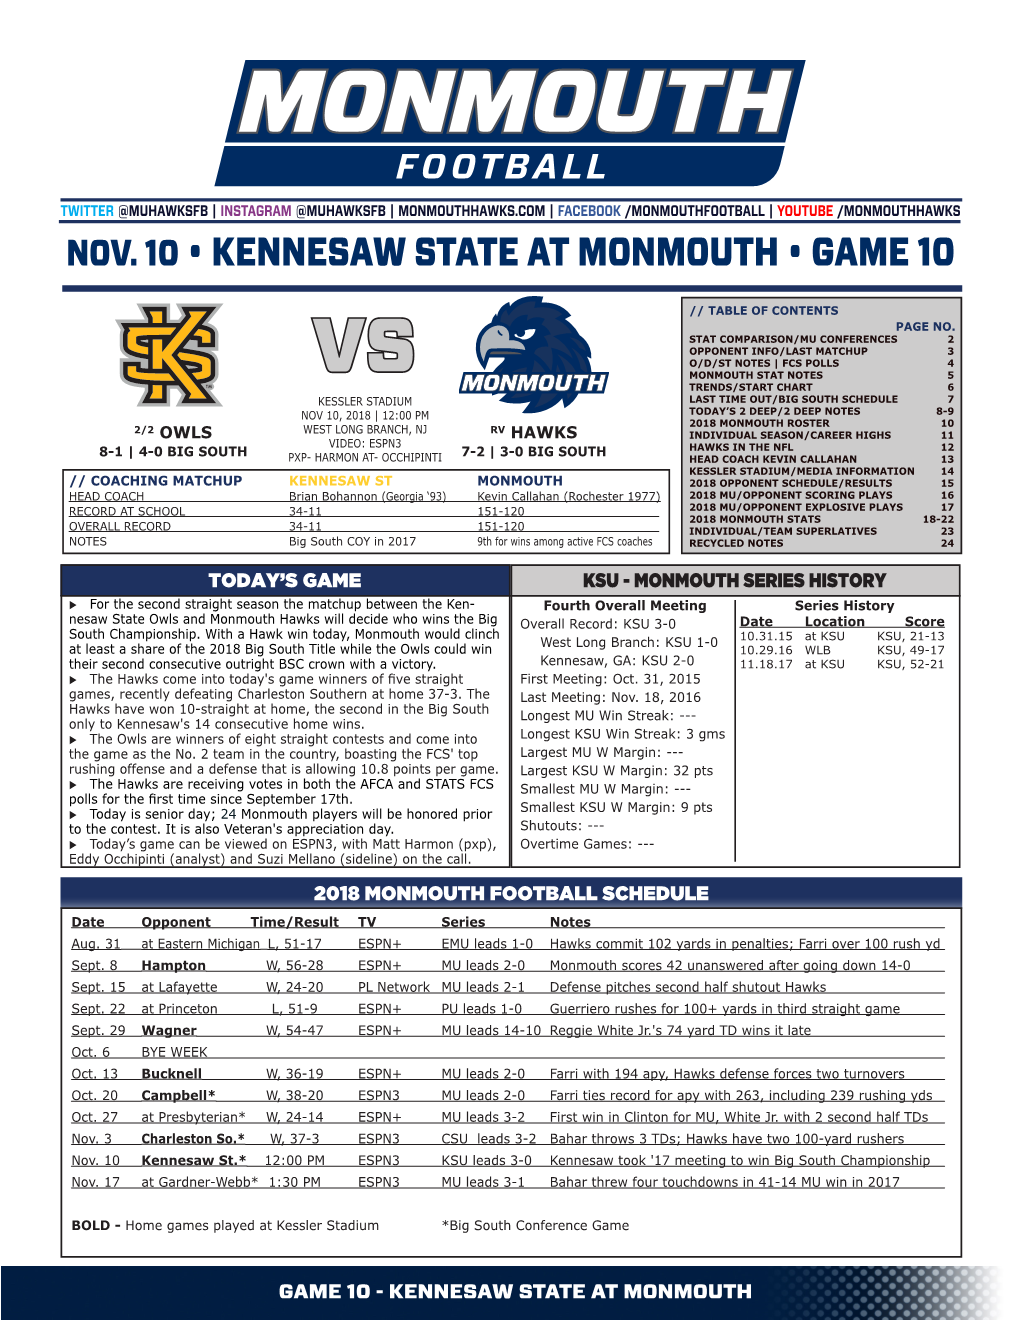 Nov. 10 • Kennesaw State at Monmouth • Game 10